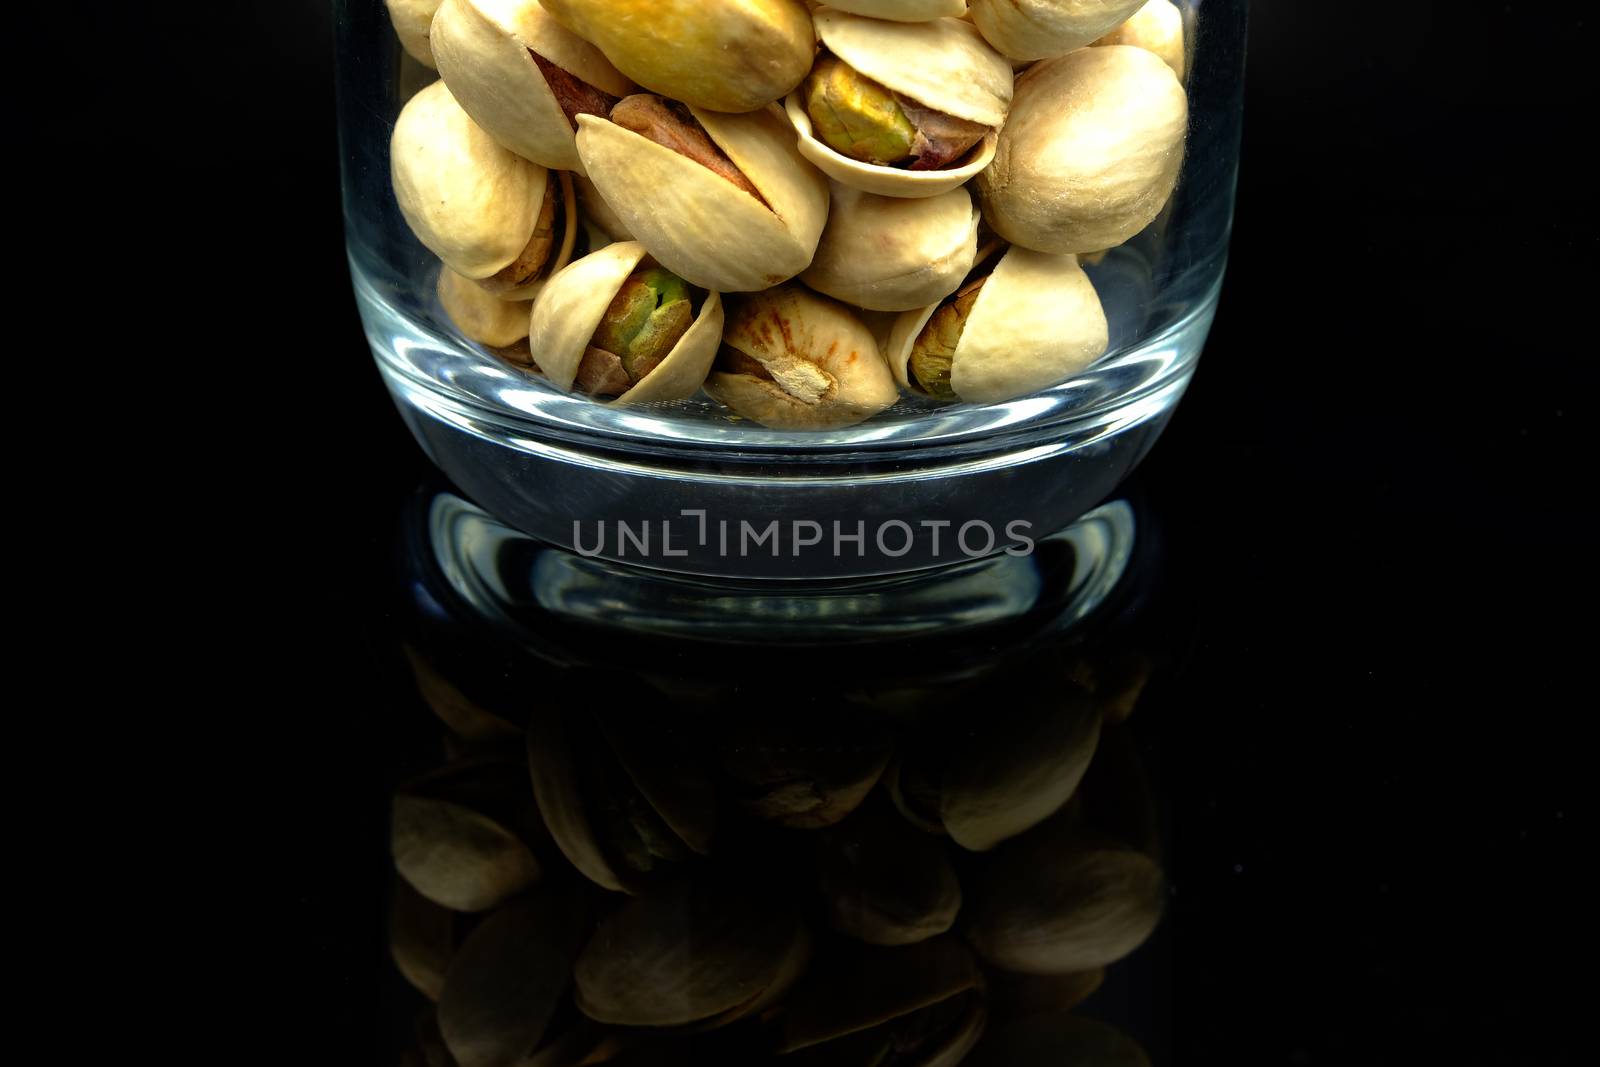 roasted pistachio in a clear glass bottle, close-up details